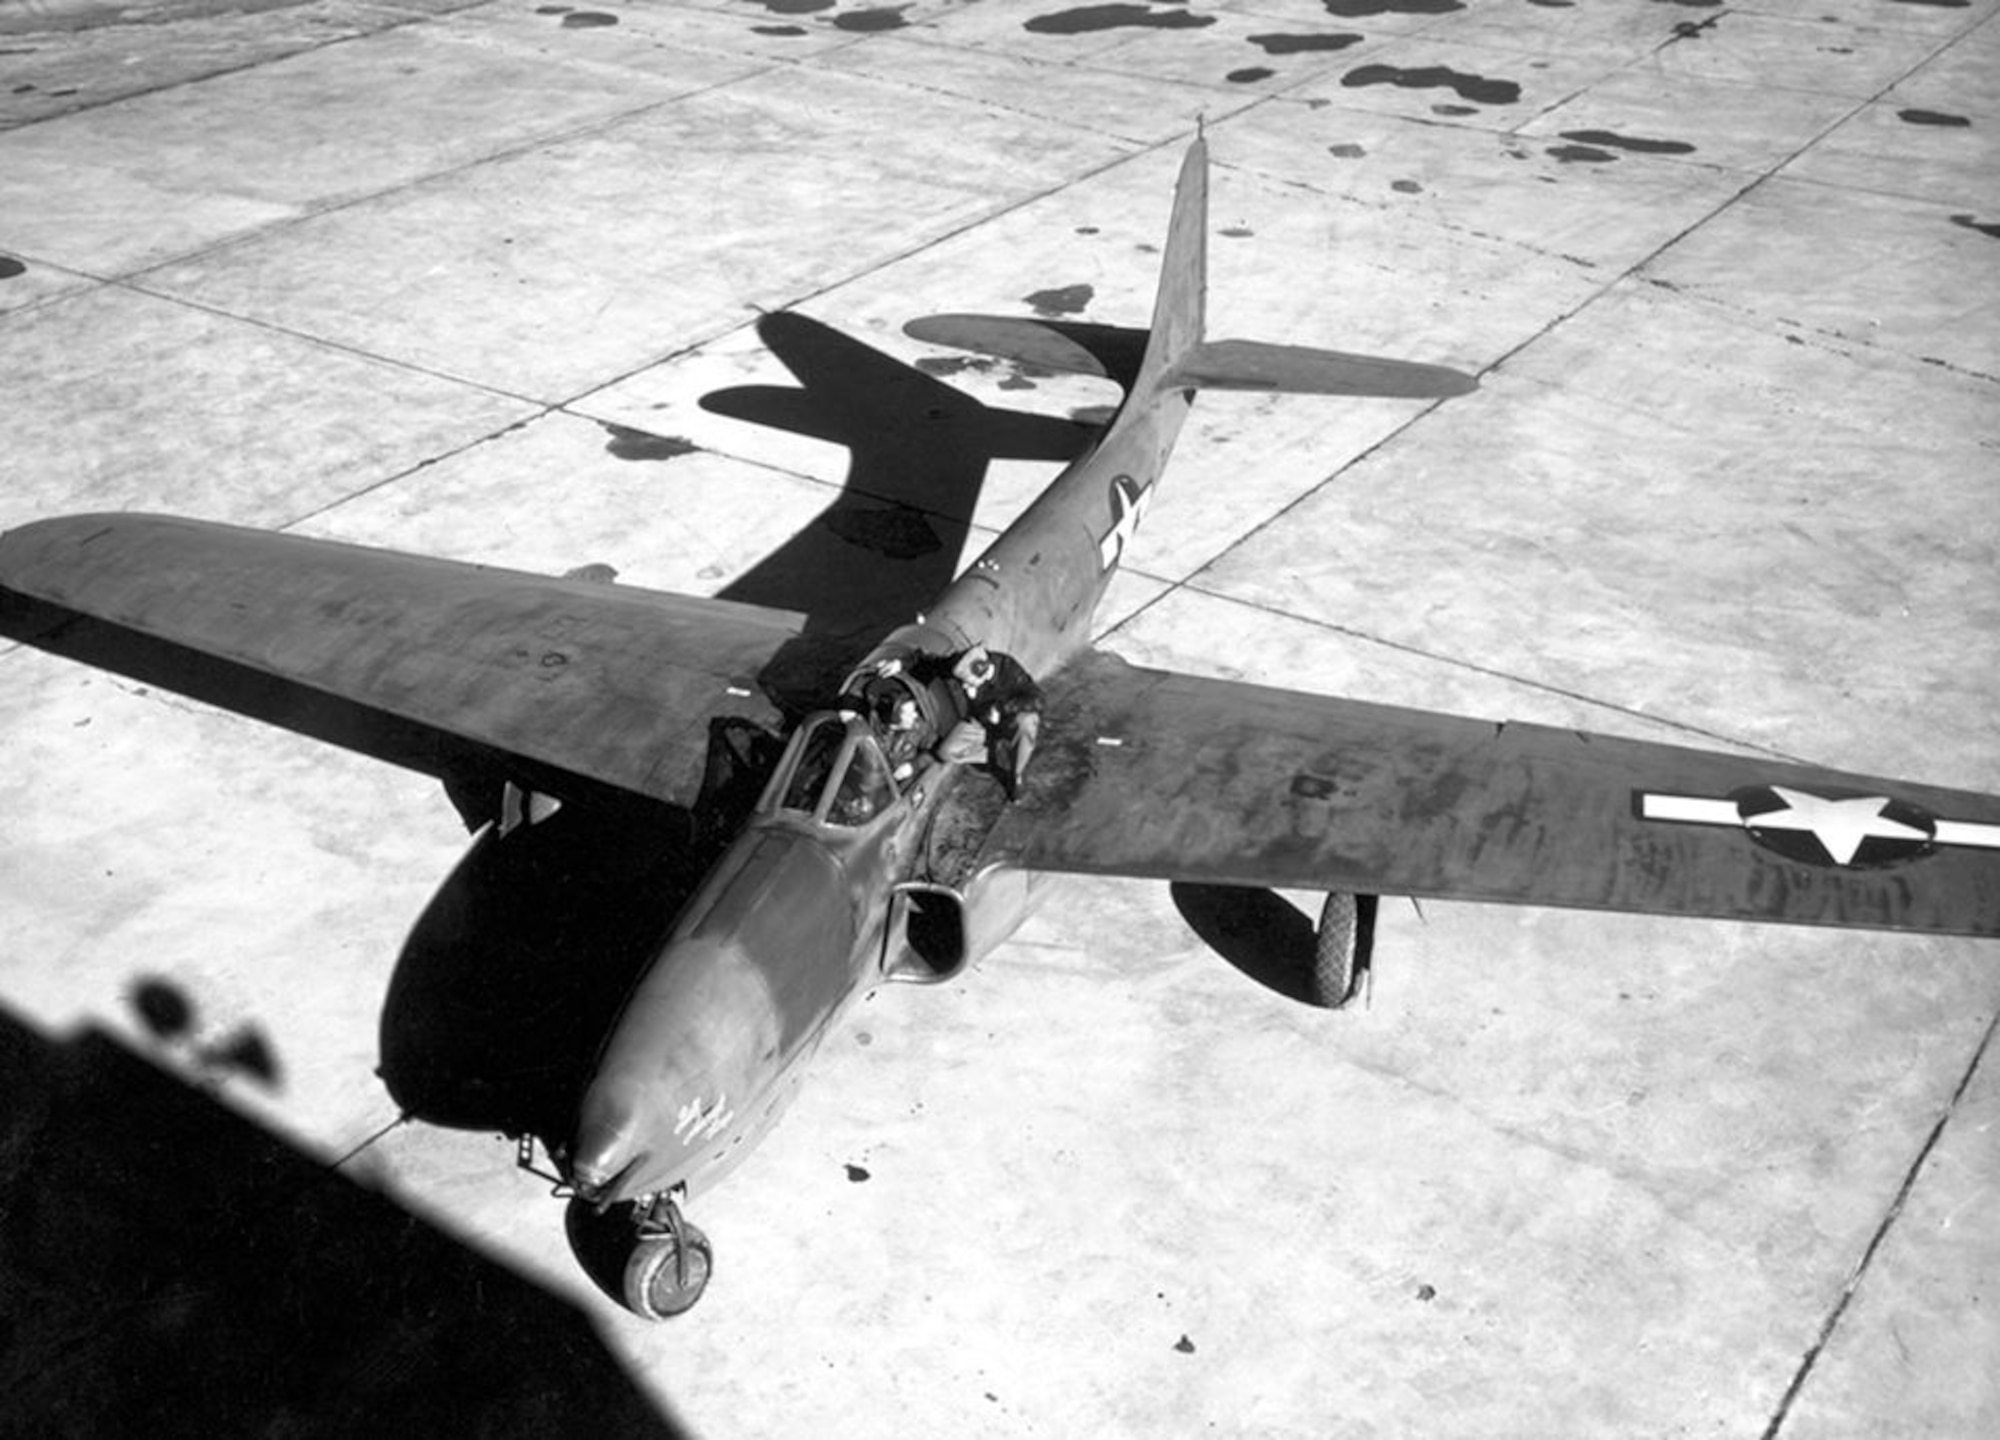 XP-59A Airacomet America's First Jet Aircraft - 1943 — at Edwards Air Force Base.